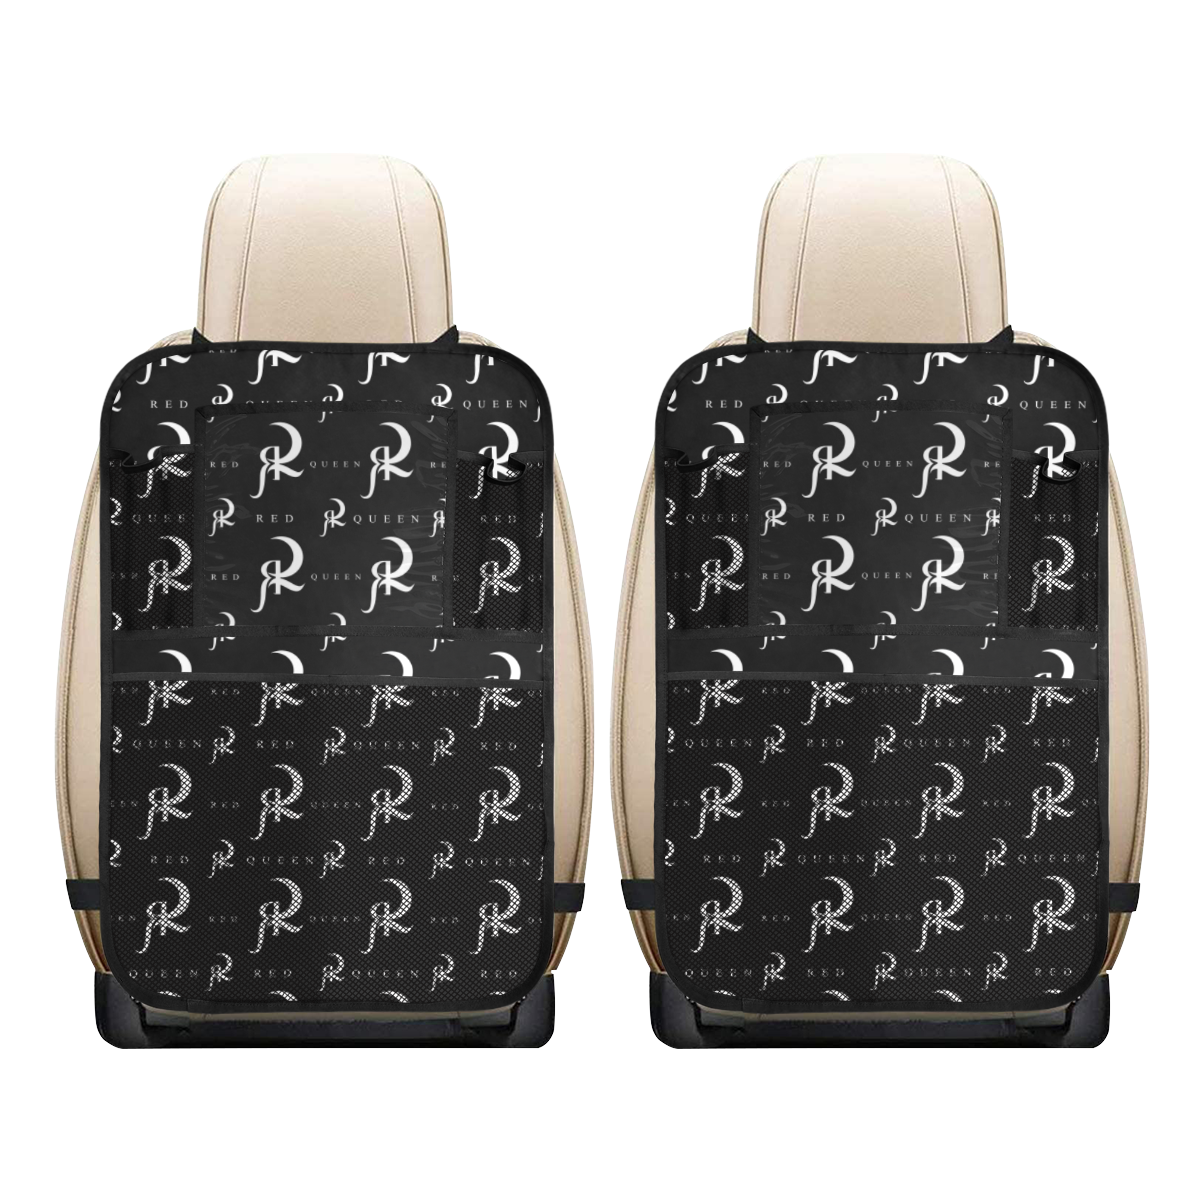 RED QUEEN WHITE & BLACK PATTERN ALL OVER Car Seat Back Organizer (2-Pack)